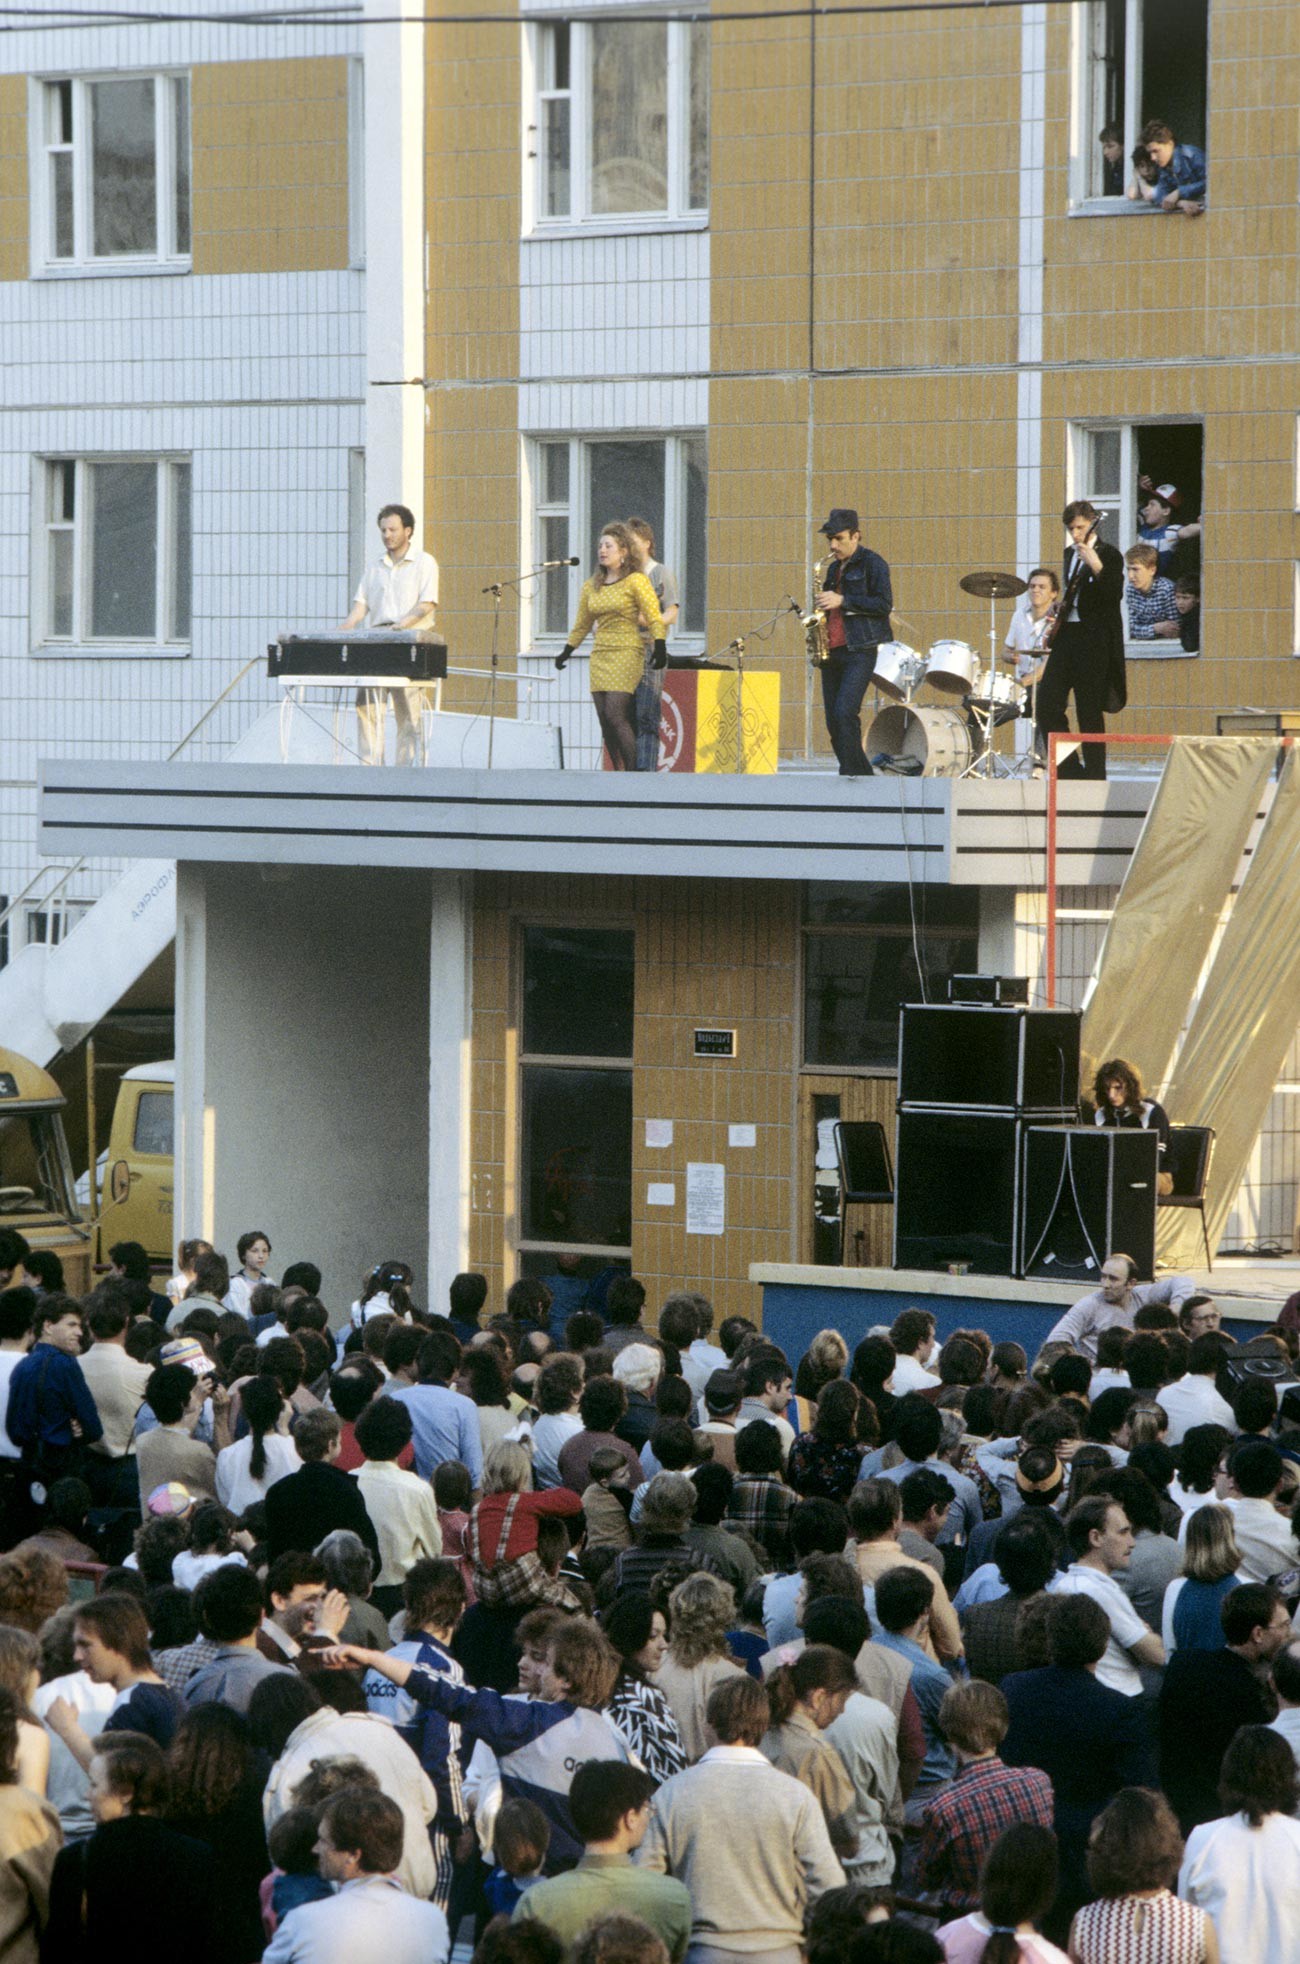 A housewarming party at the Atom residential complex for youth in Moscow.